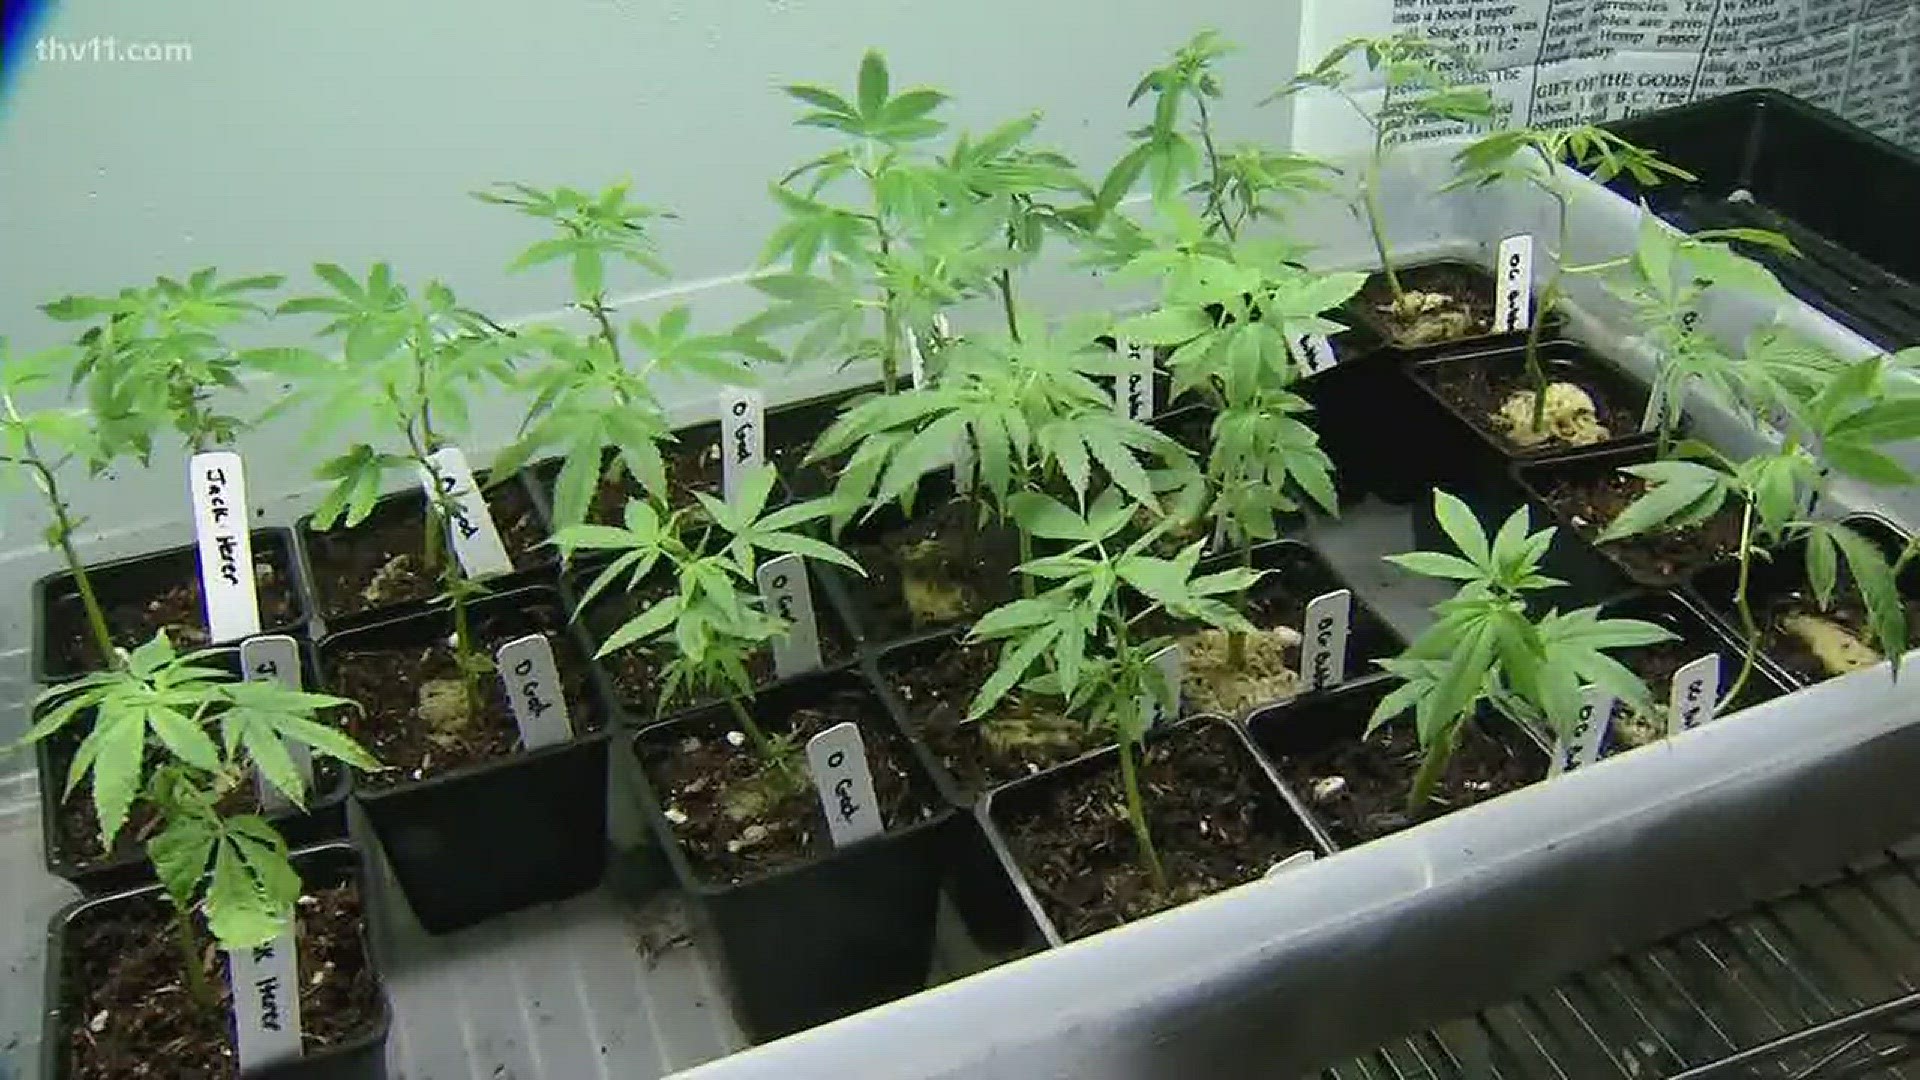 Tuesday, Feb. 27, the Medical Marijuana Commission will name the five cultivator licensees for the state.